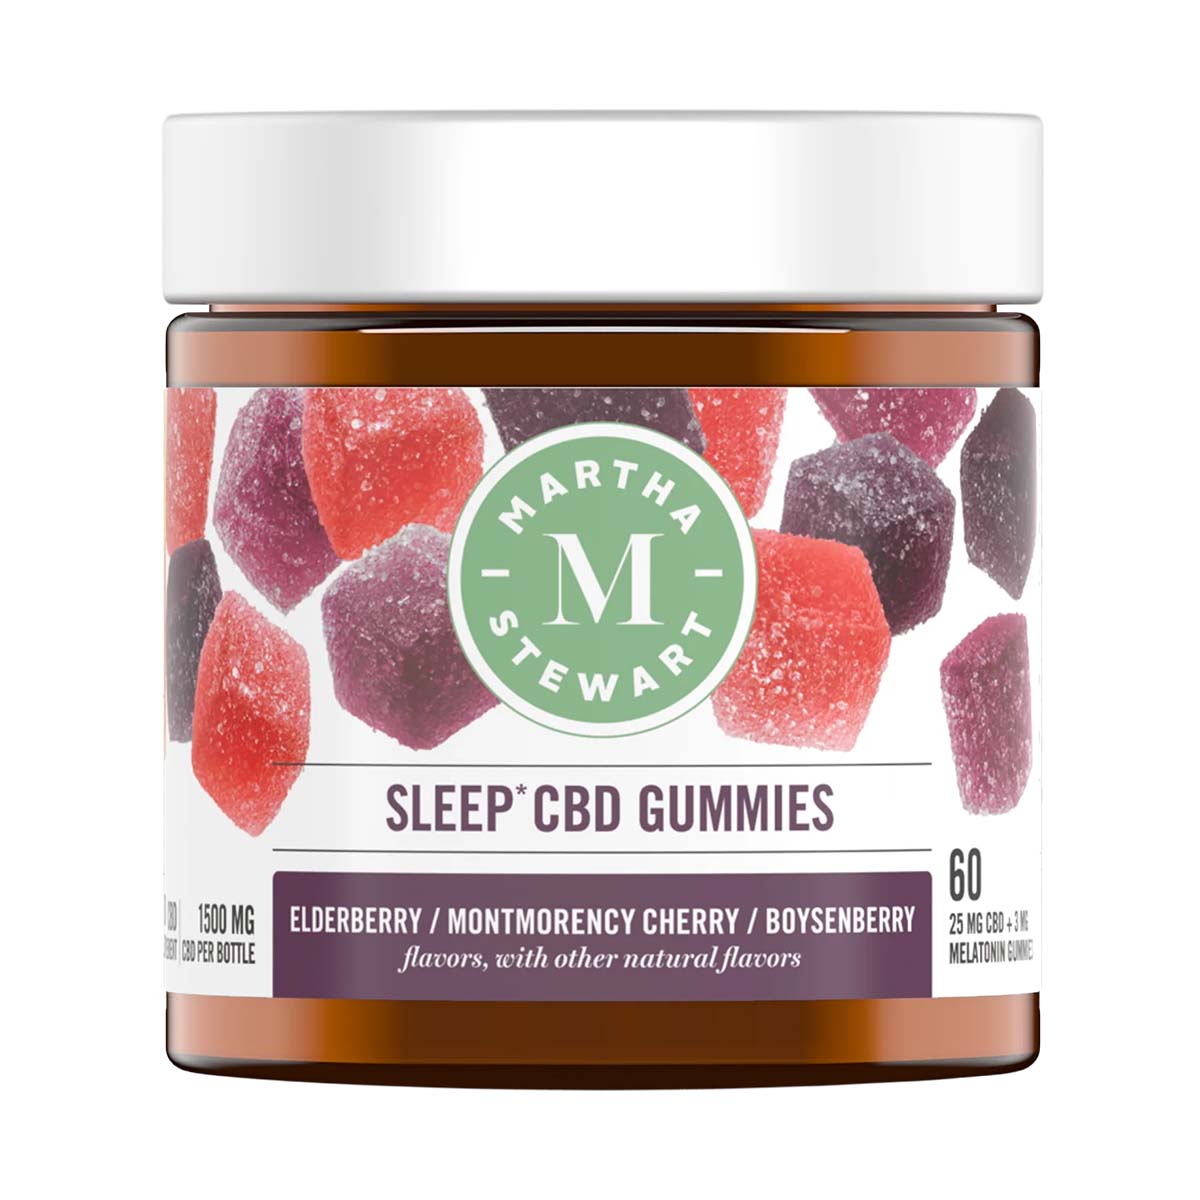 Jar of Martha Stewart Sleep CBD Gummies with pictures of gummies in shades of red and purple